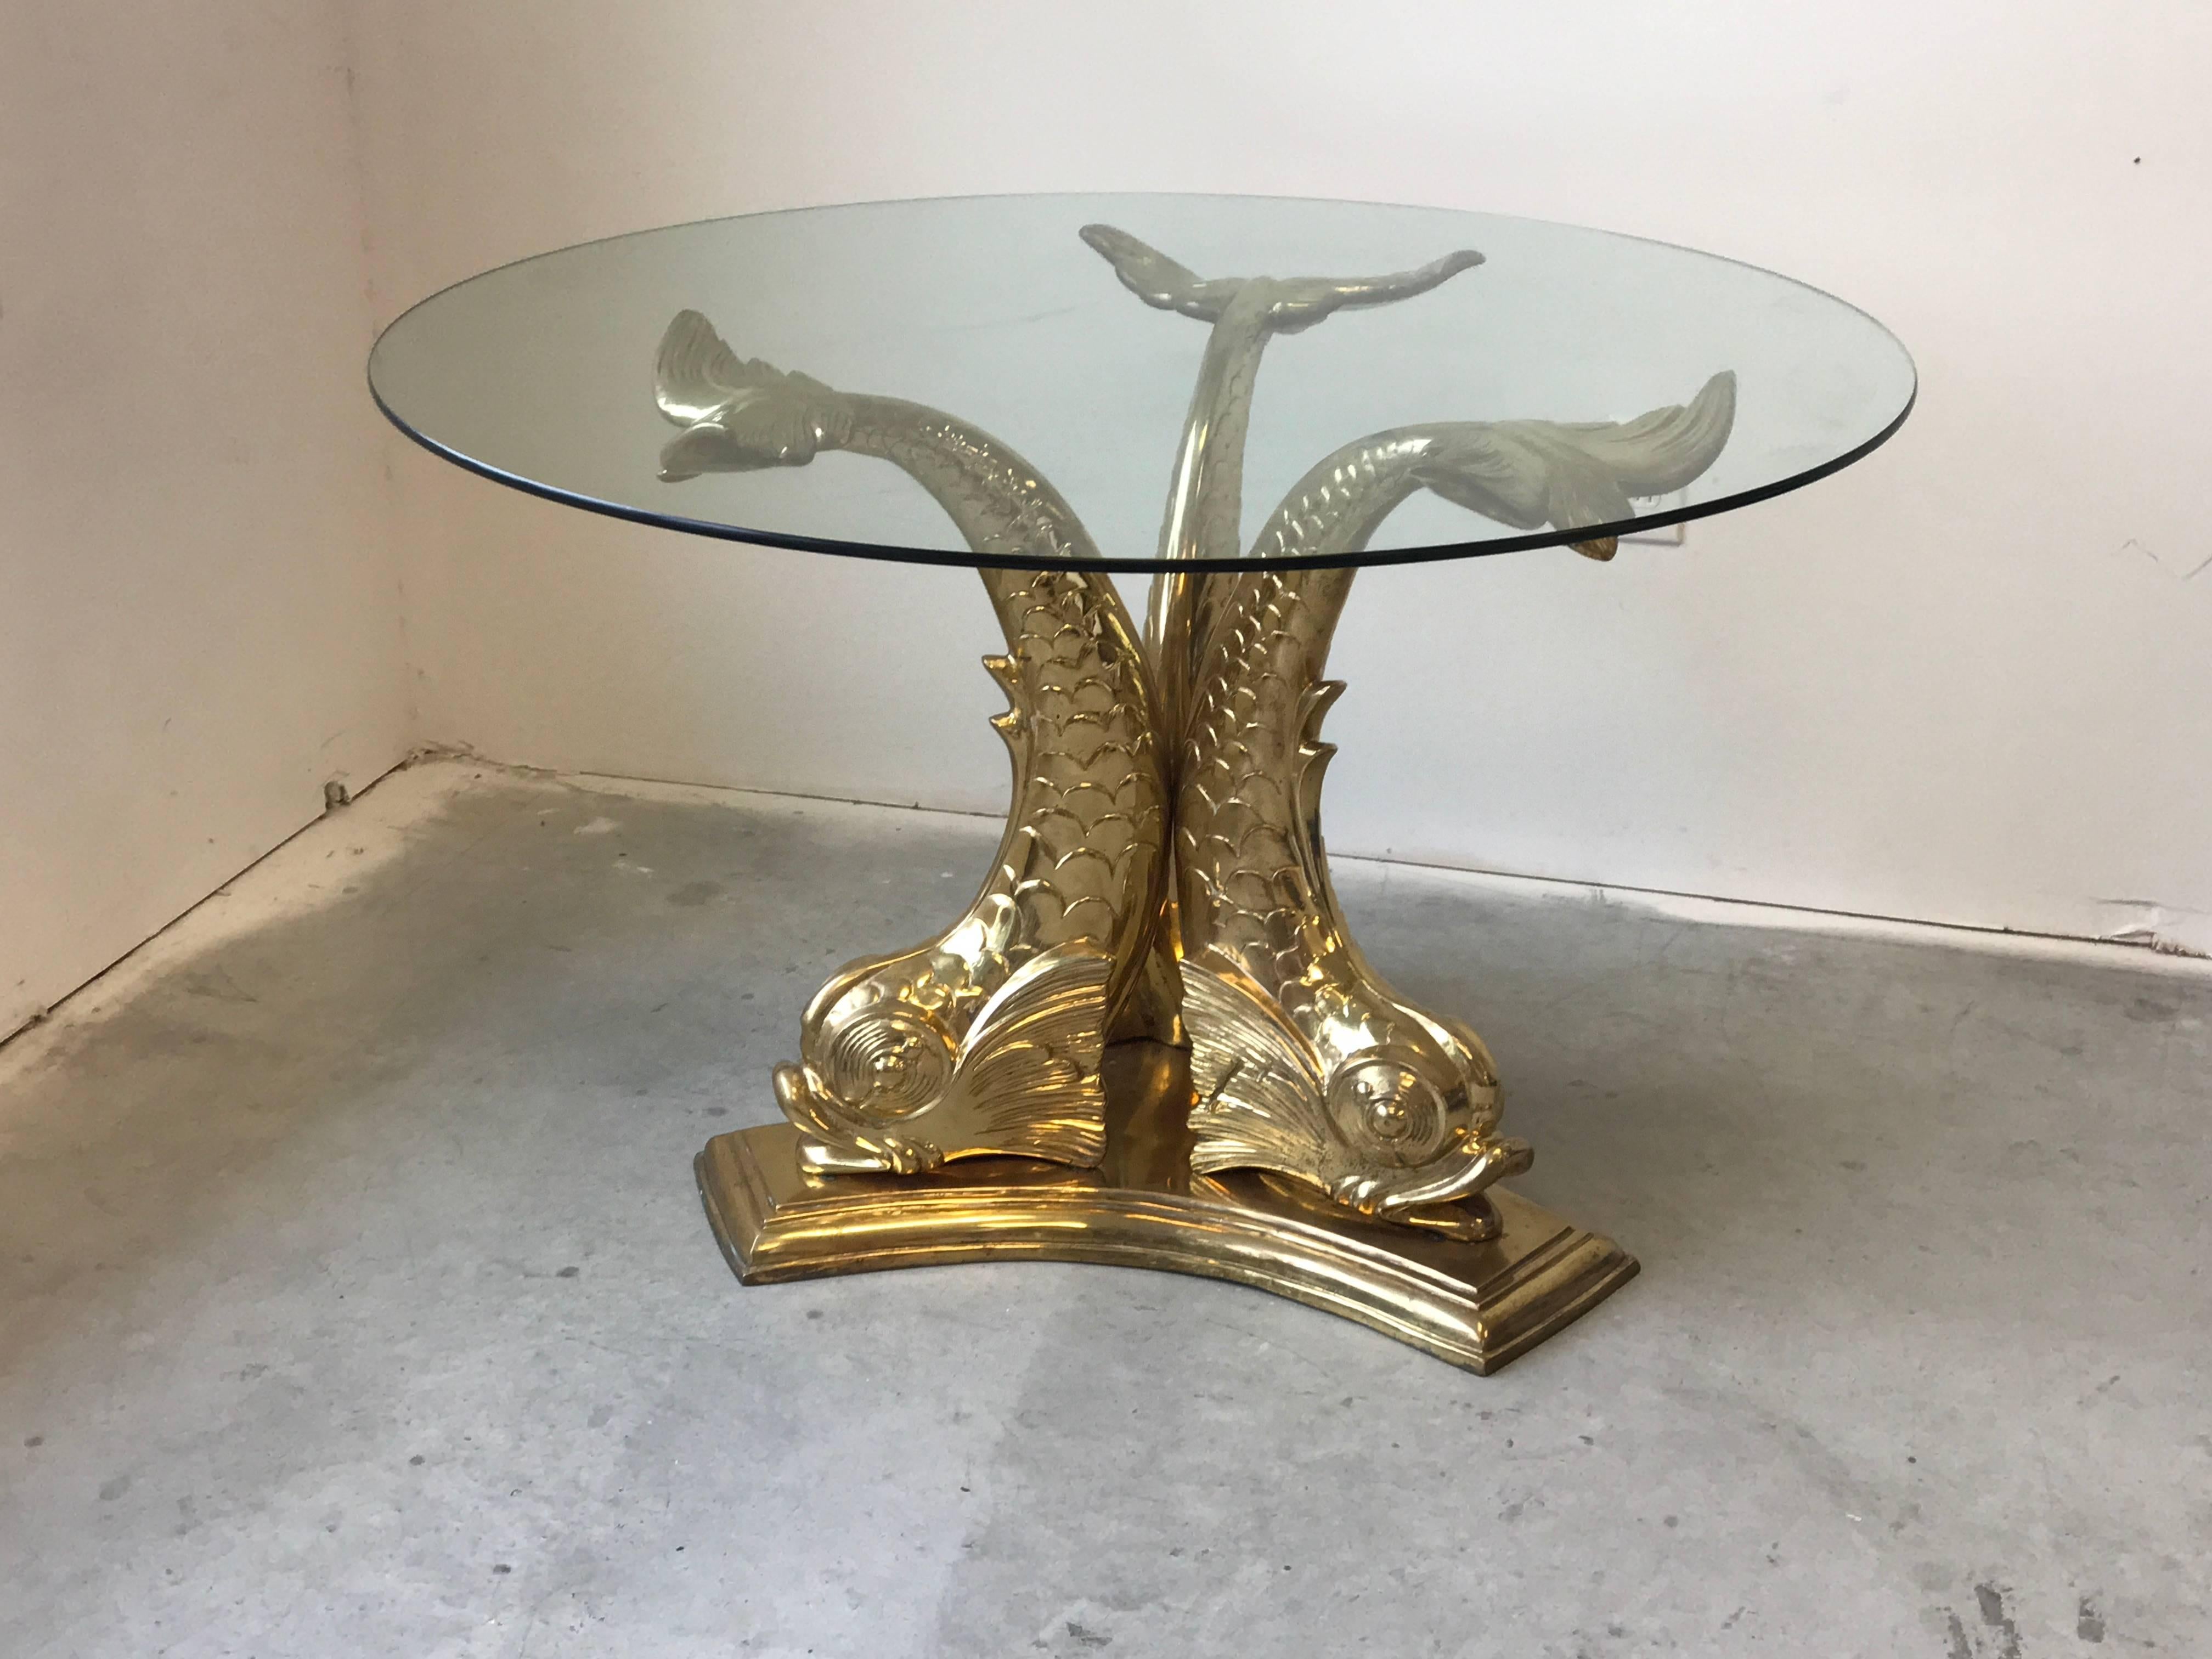 Offered is a fabulous, 1960s Italian brass koi fish dining table with a 48